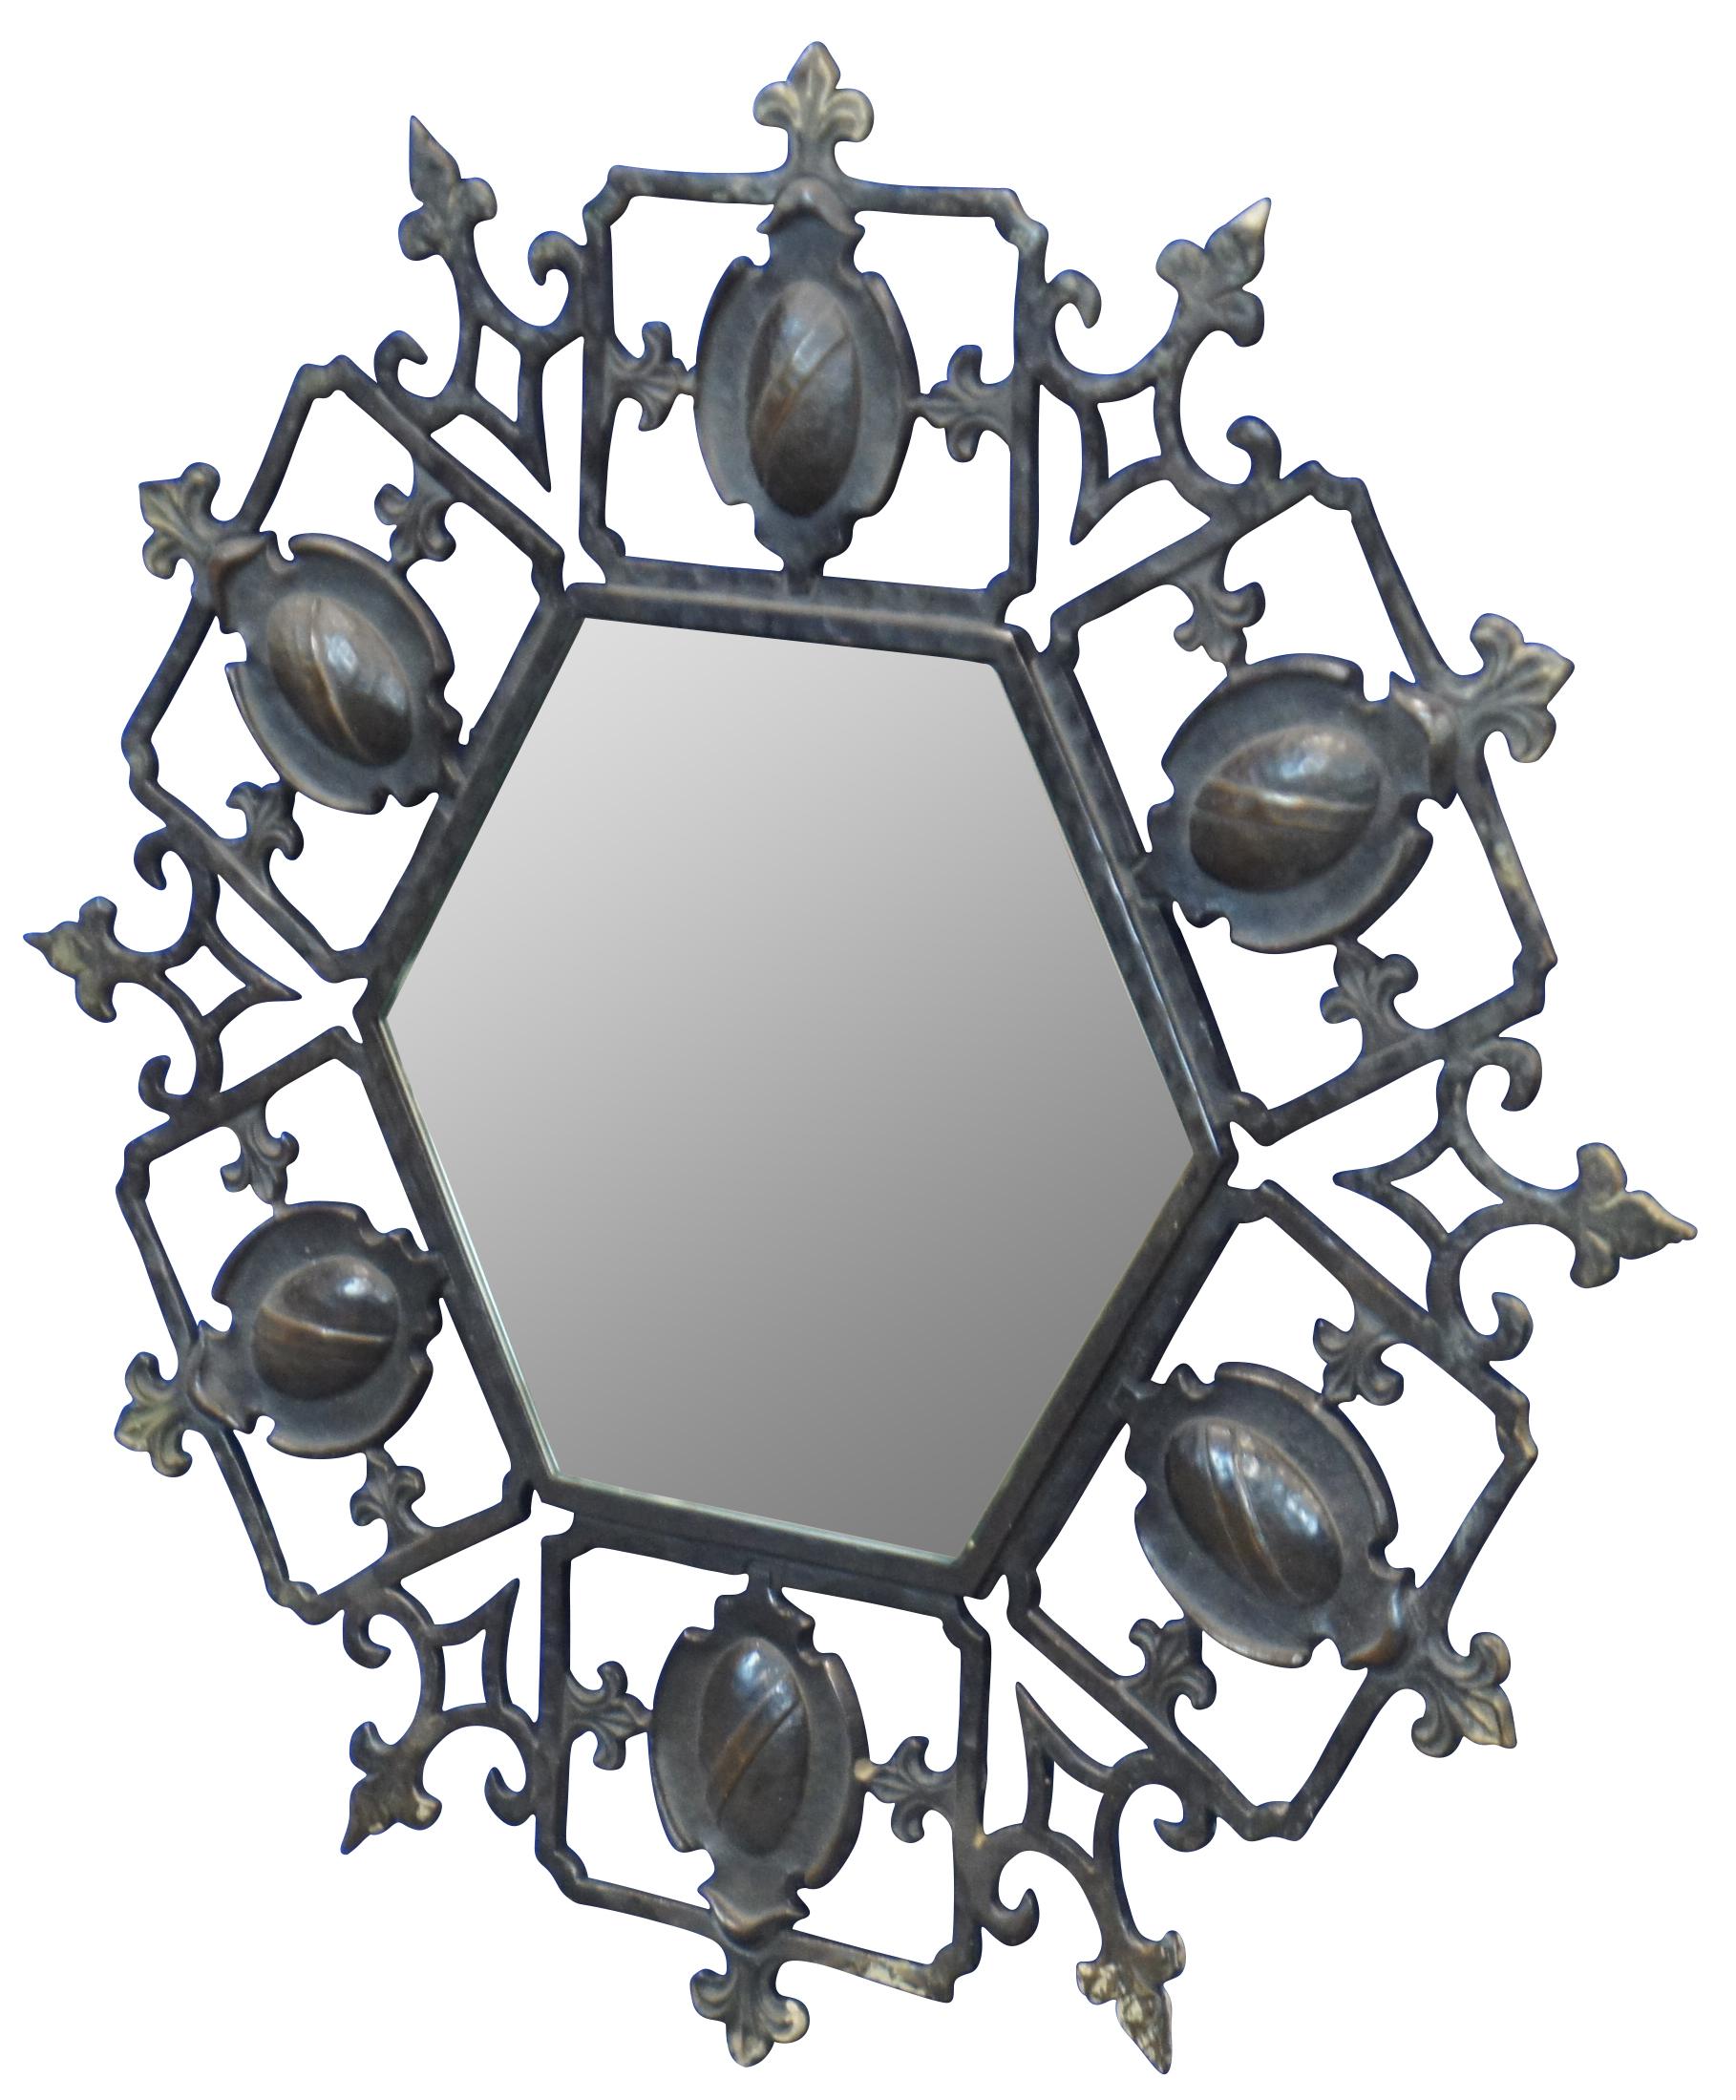 Mid century wrought iron medieval or Spanish Revival wall mirror with a hexagonal / circular / starburst / sunburst shape surrounded by a pierced / reticulated design of heraldic shields and fleur de lis. Measure: 17